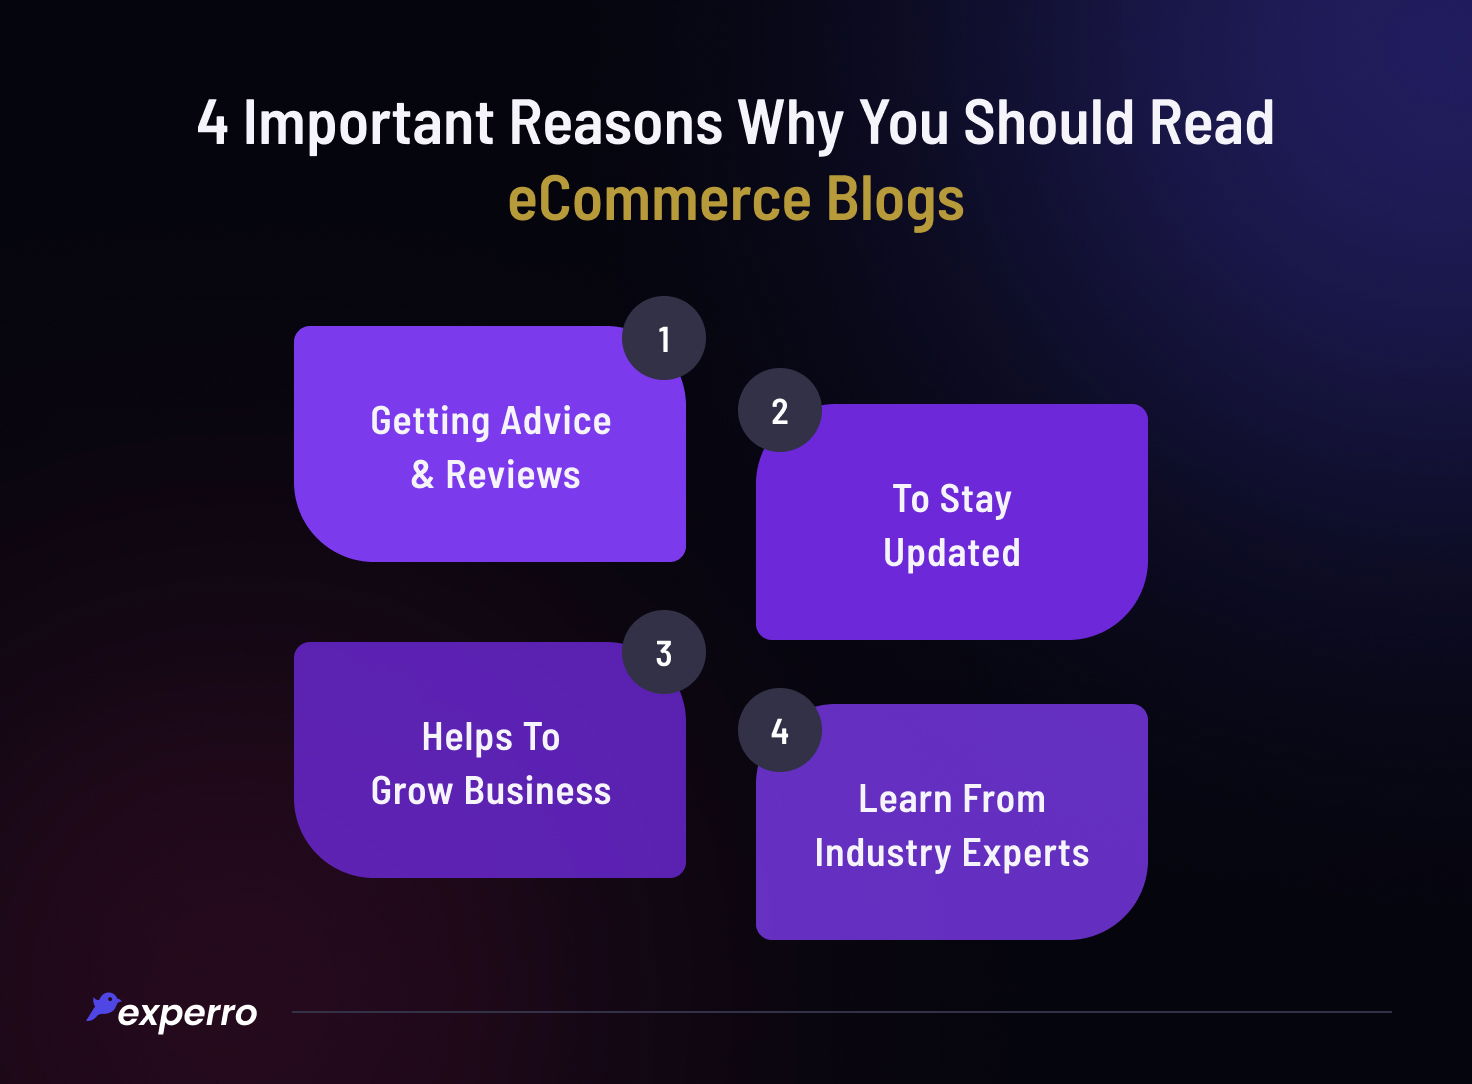 Reasons To Read eCommerce Blogs